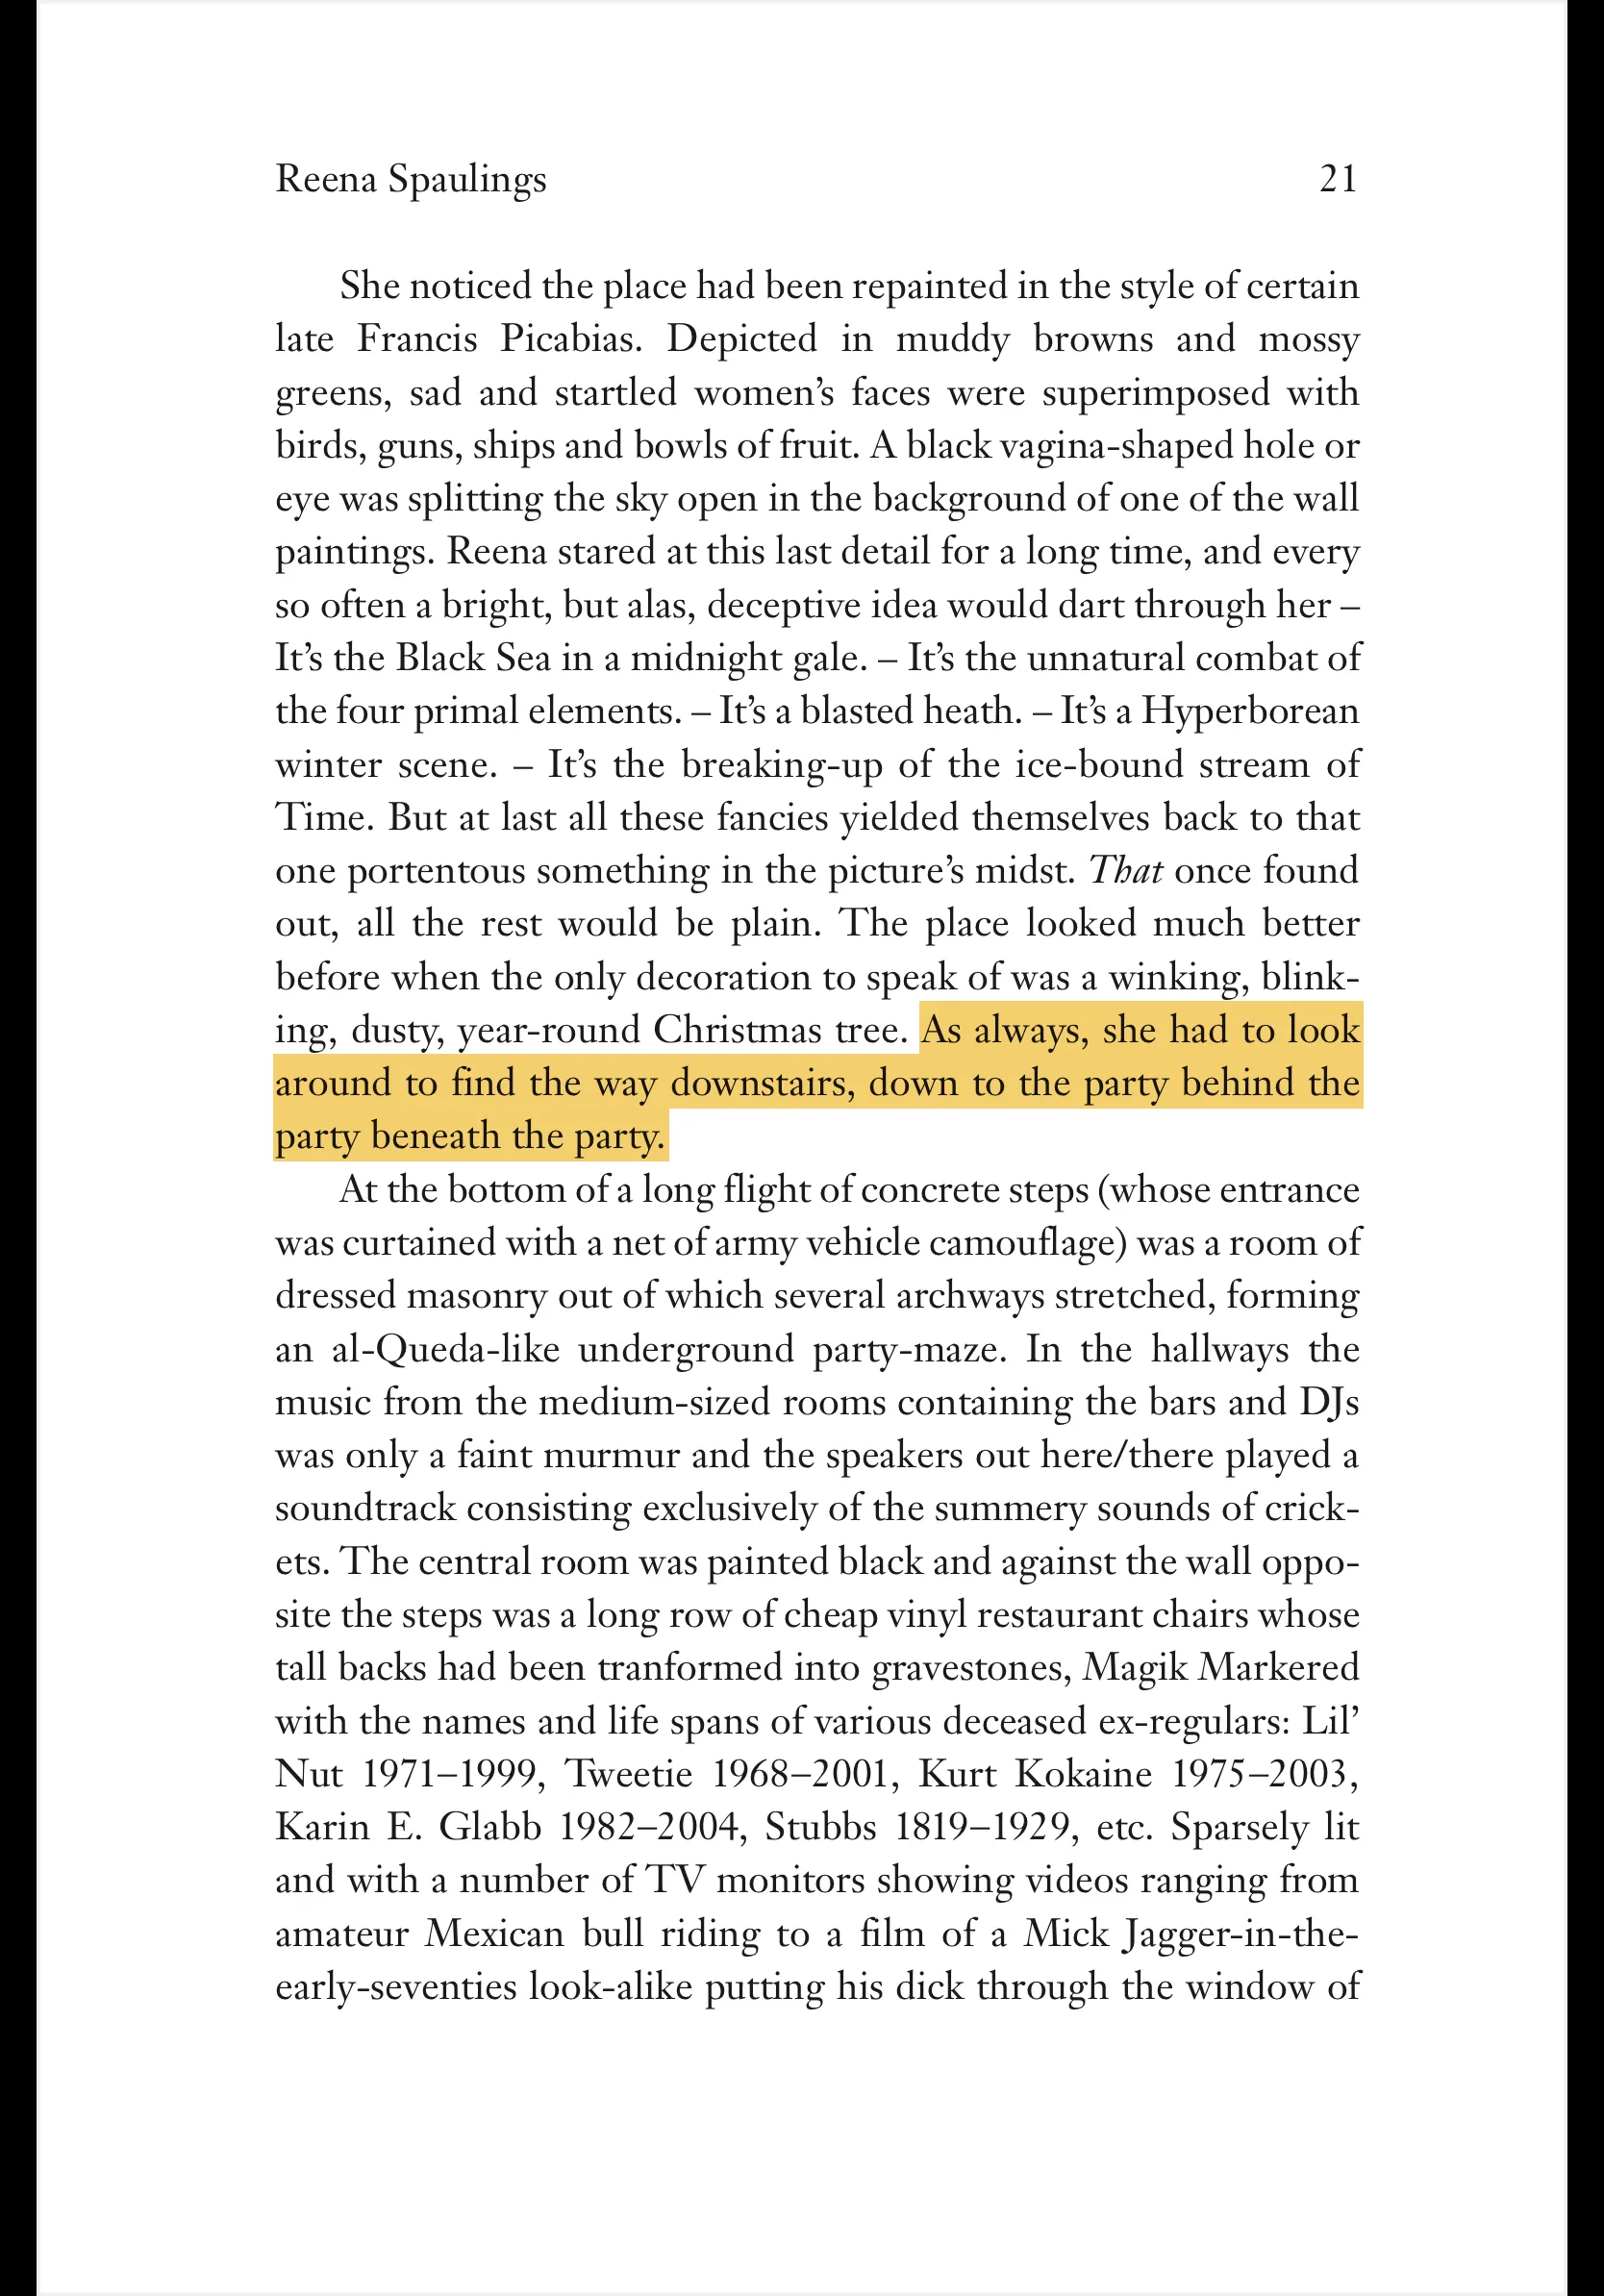 A screenshot of an excerpt from Reena Spaulings. Highlighted: 'As always, she had to look around to find the way downstairs, down to the party behind the party beneath the party.'.